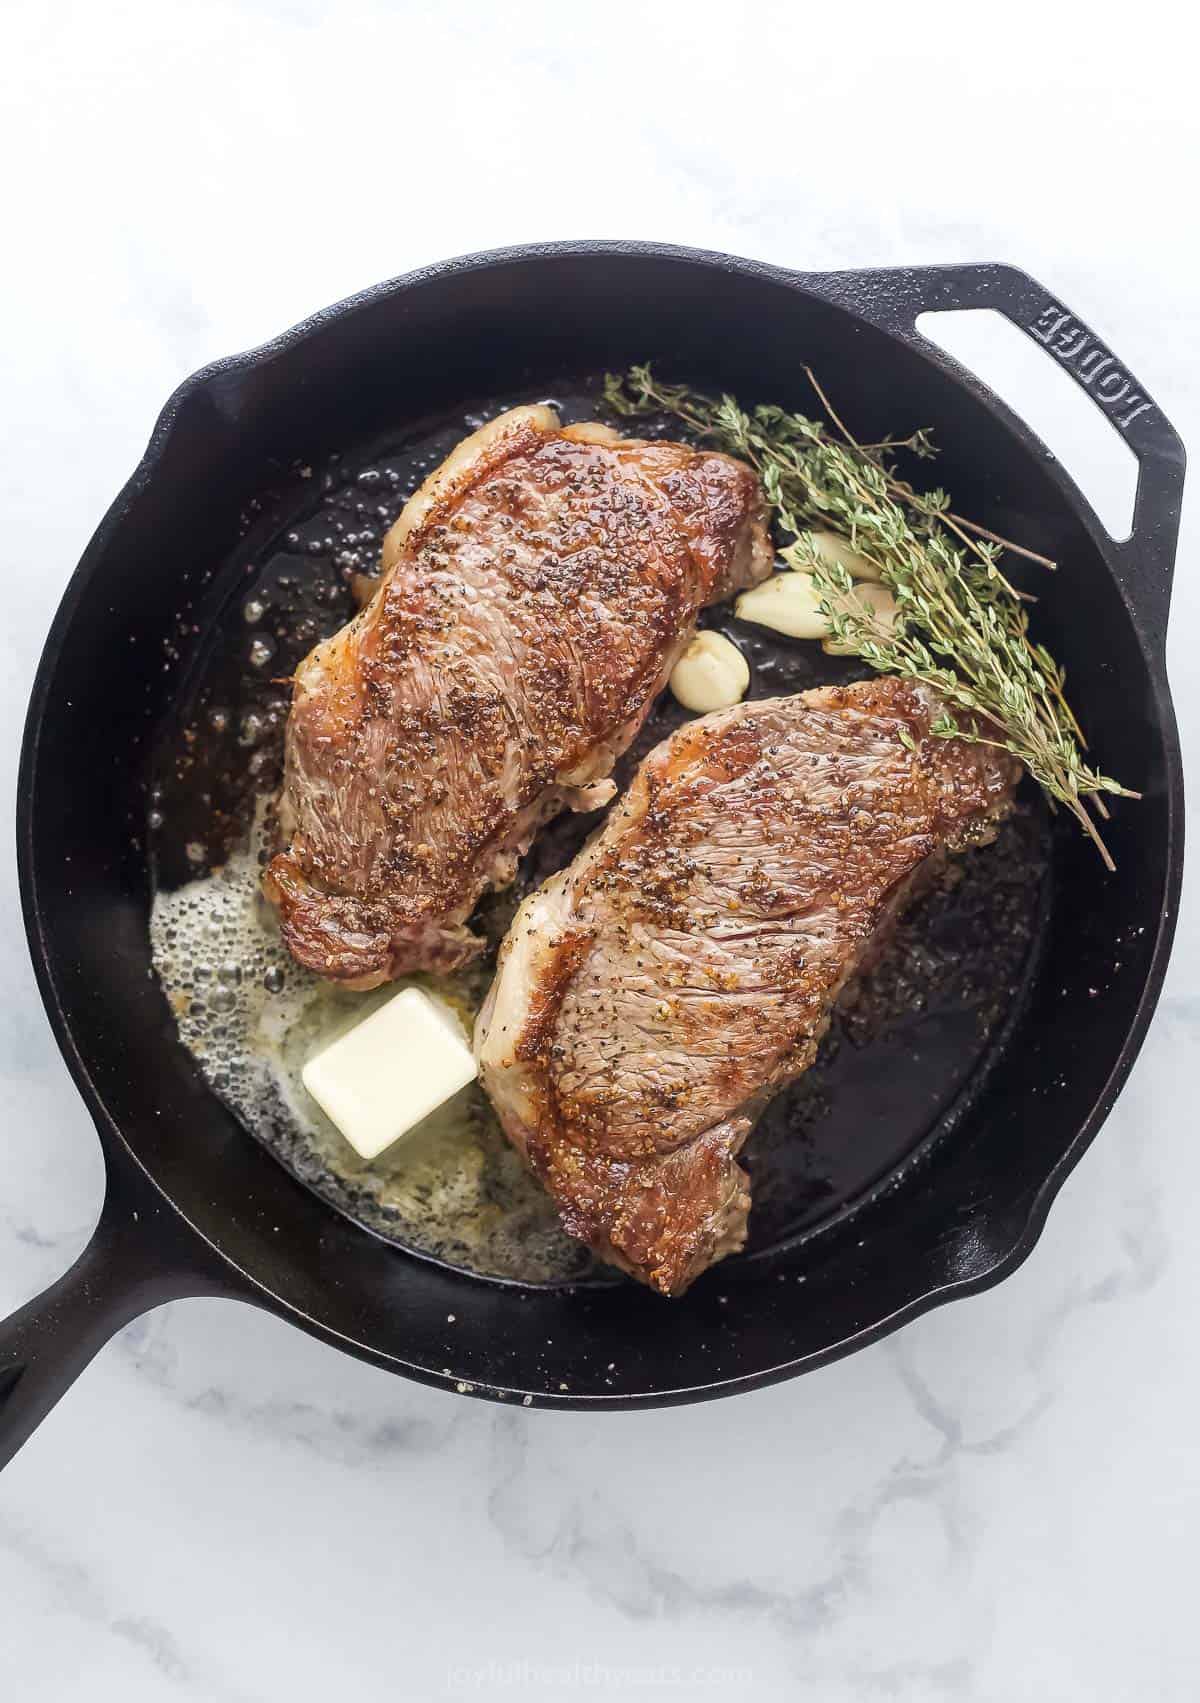 Place the New Year's steak in a large cast iron skillet and add the cream, thyme and garlic.